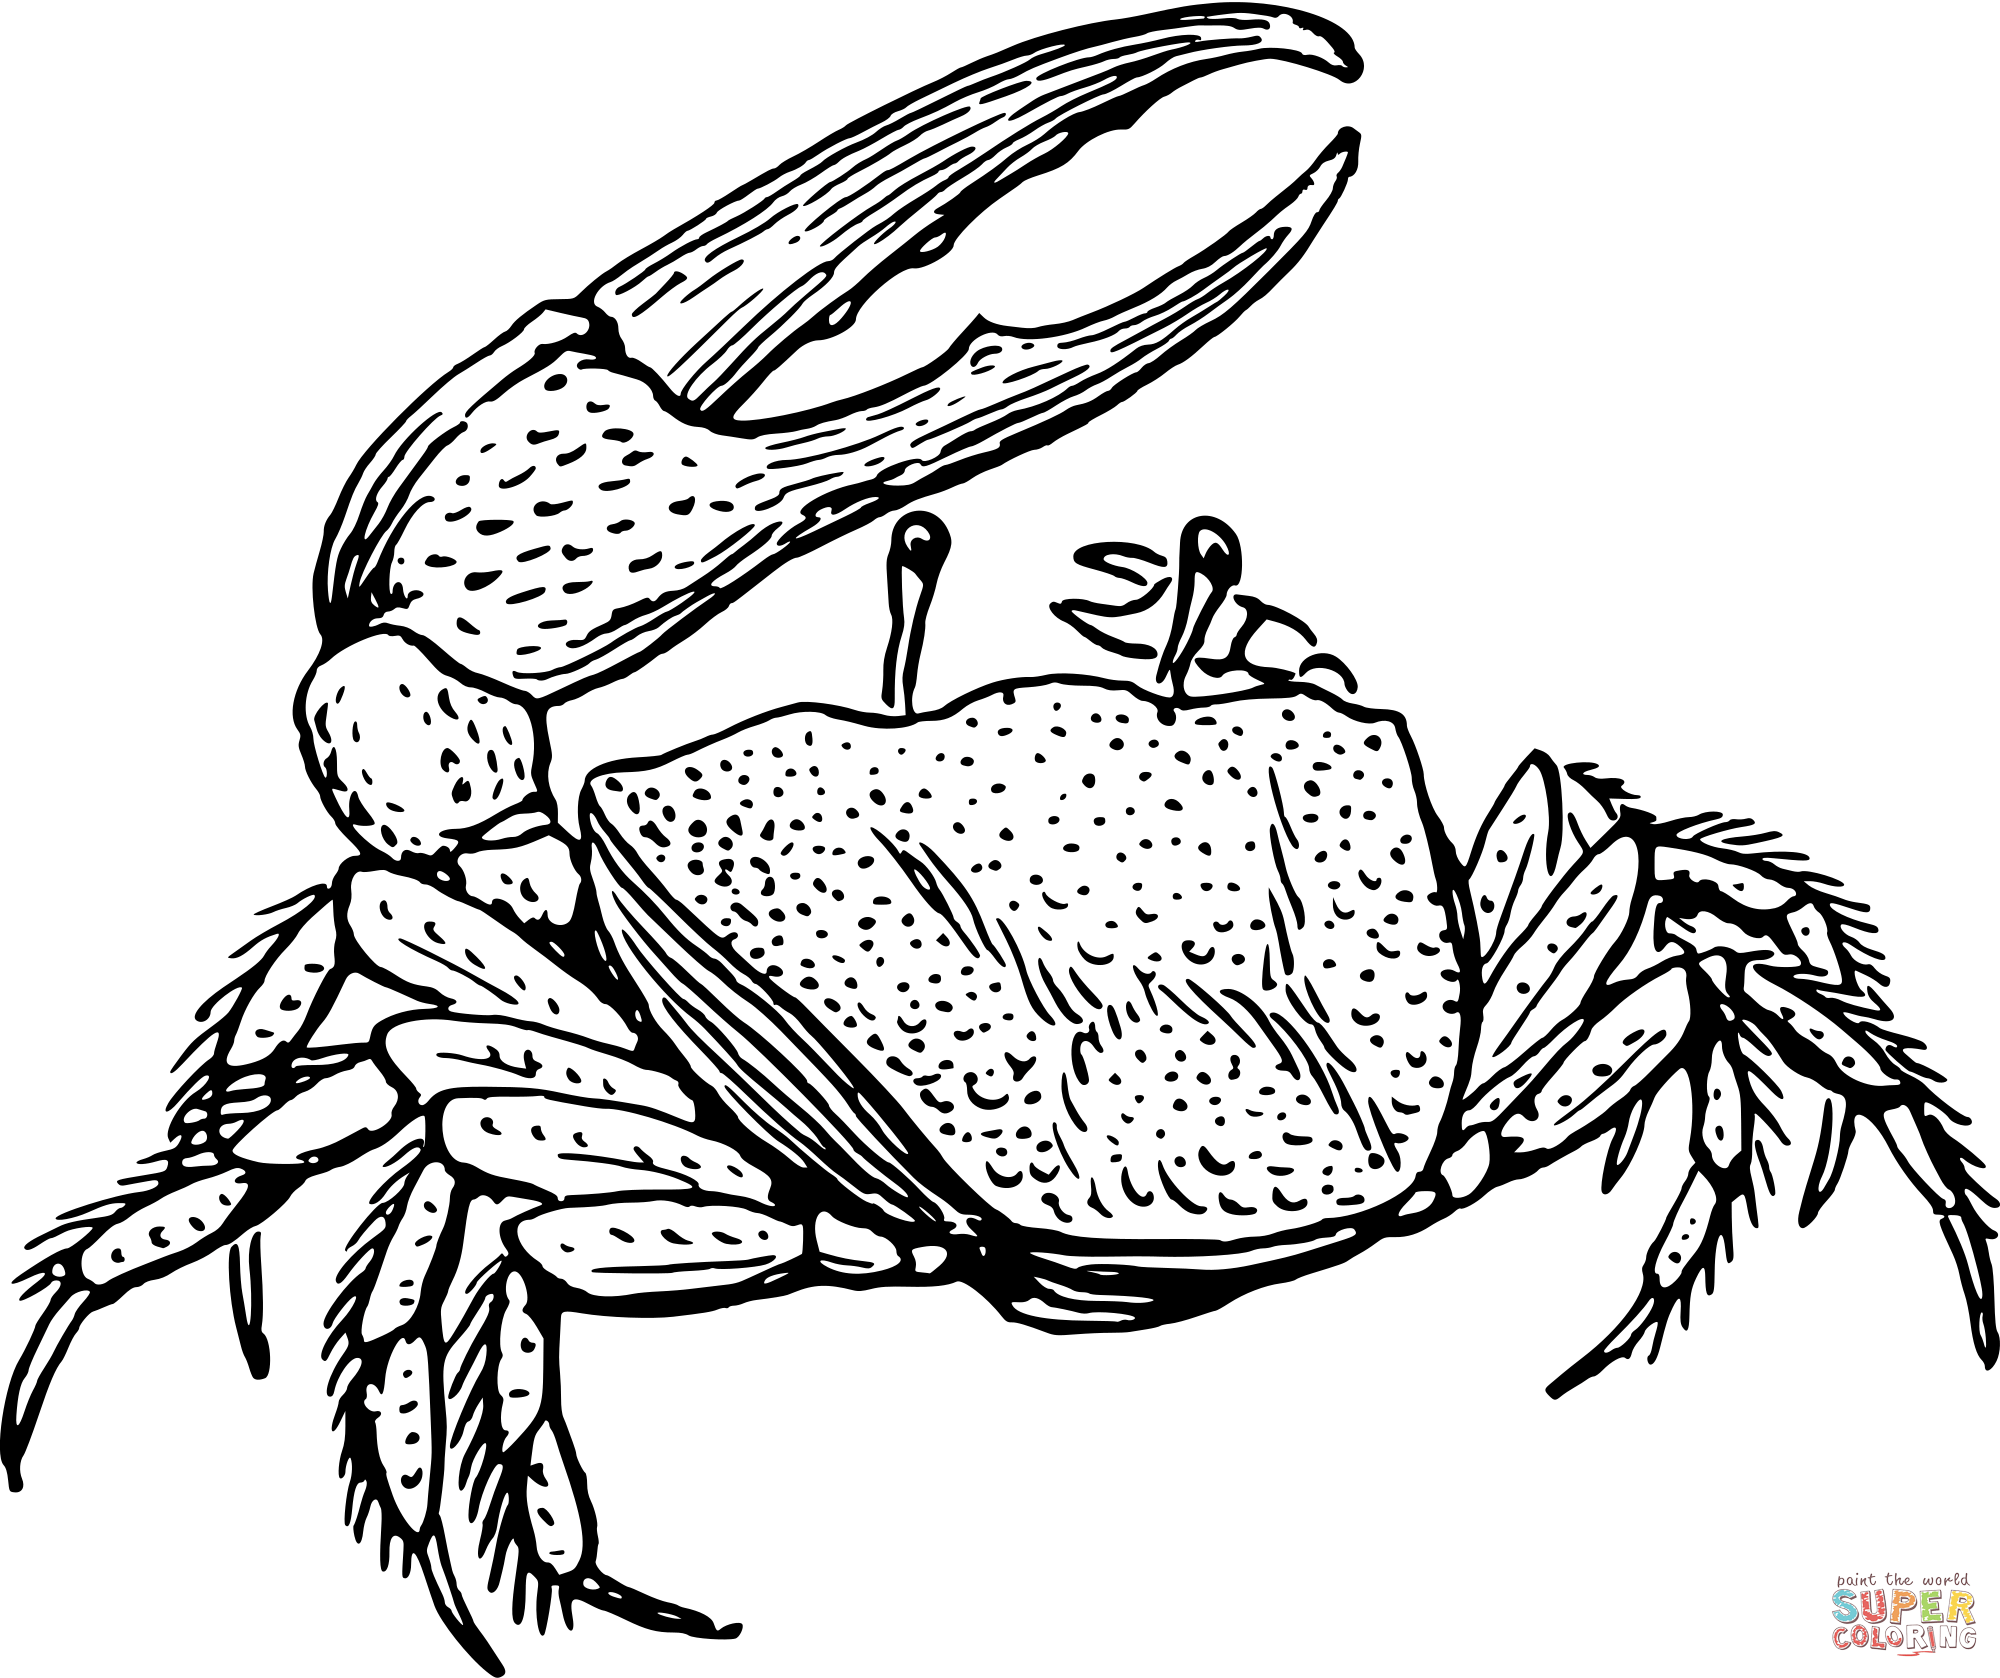 Vintage fiddler crab coloring page free printable coloring pages